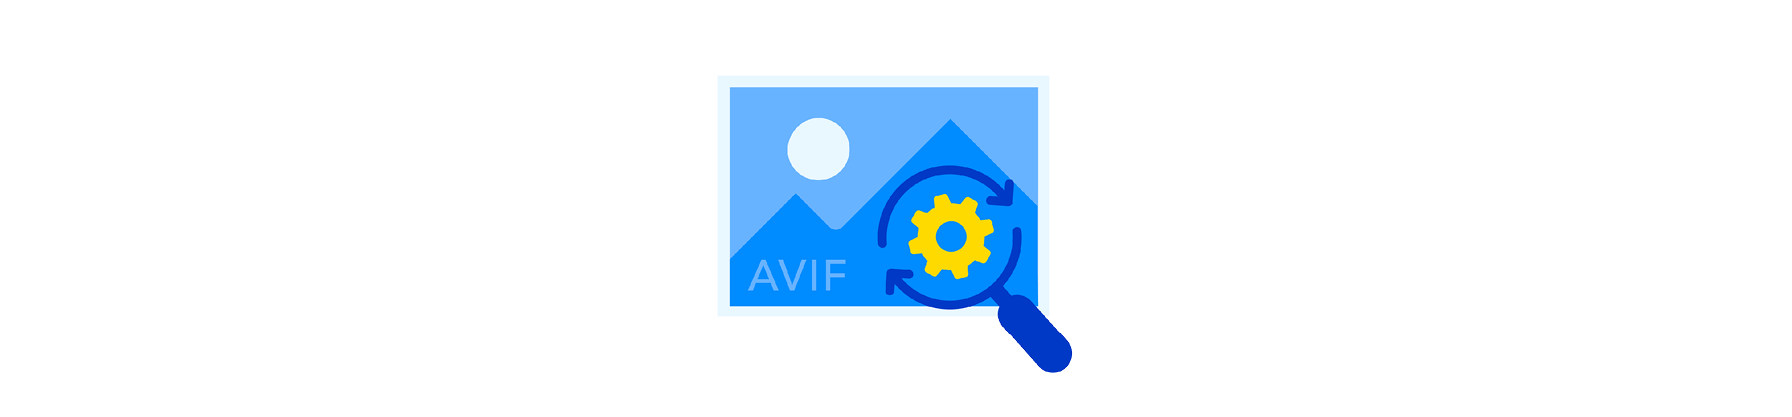 Illustrated icon representing the AVIF image format